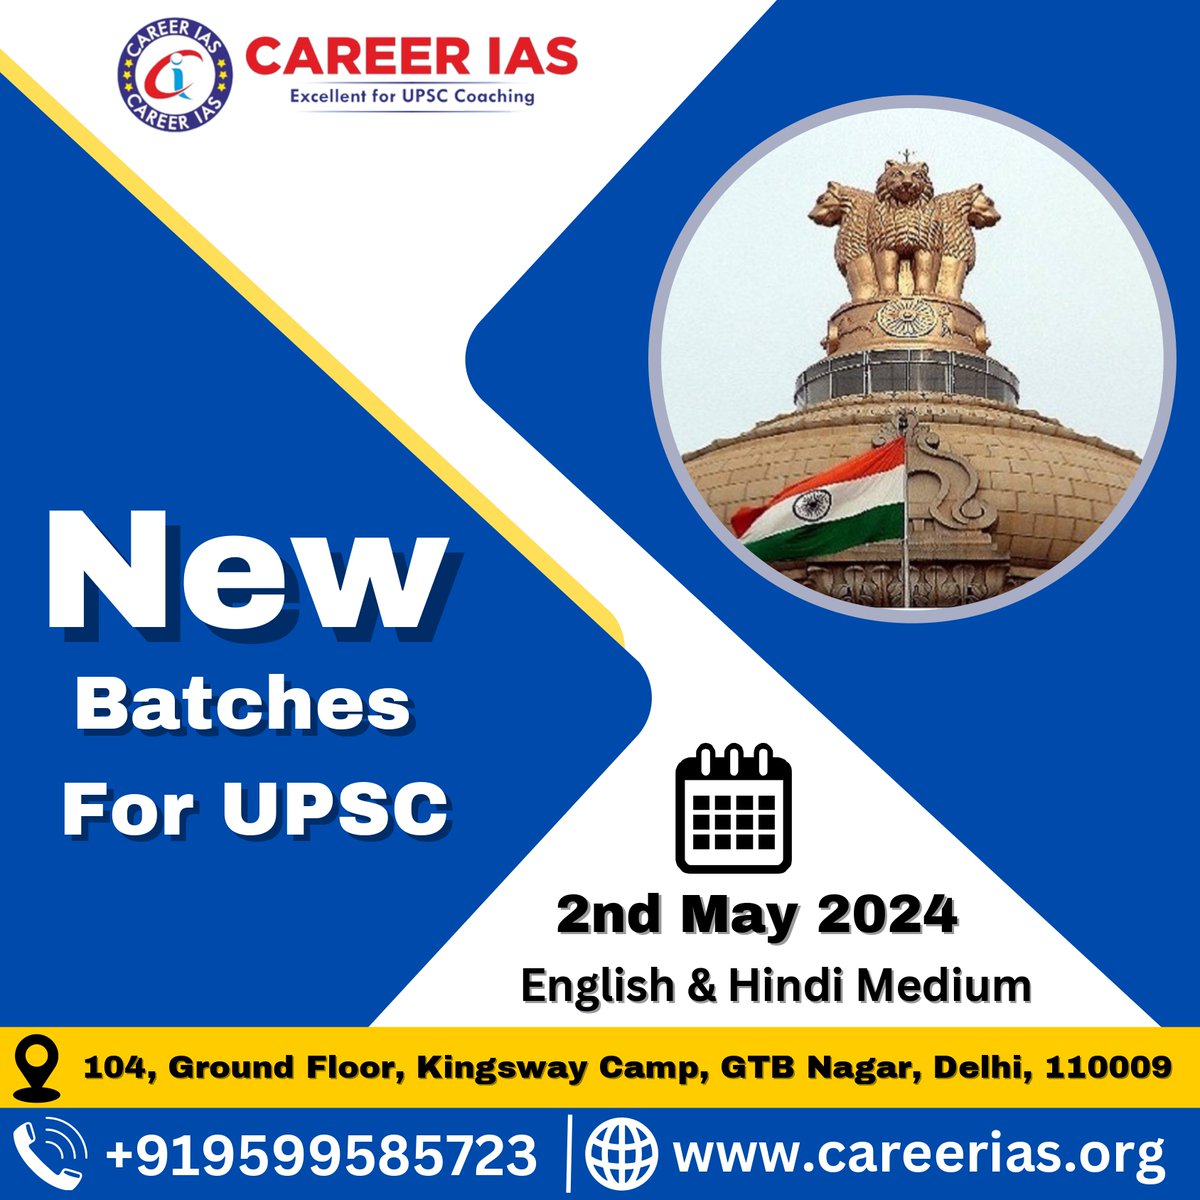 Elevate your UPSC prep with Career IAS! New Batches start May 2, 2024, at 104, Ground Floor, Kingsway Camp, GTB Nagar, Delhi. English & Hindi Medium. Enroll now! +919599585723, careerias.org.

#CareerIAS #UPSCPreparation #NewBatches #UPSC2024 #CivilServicesExam